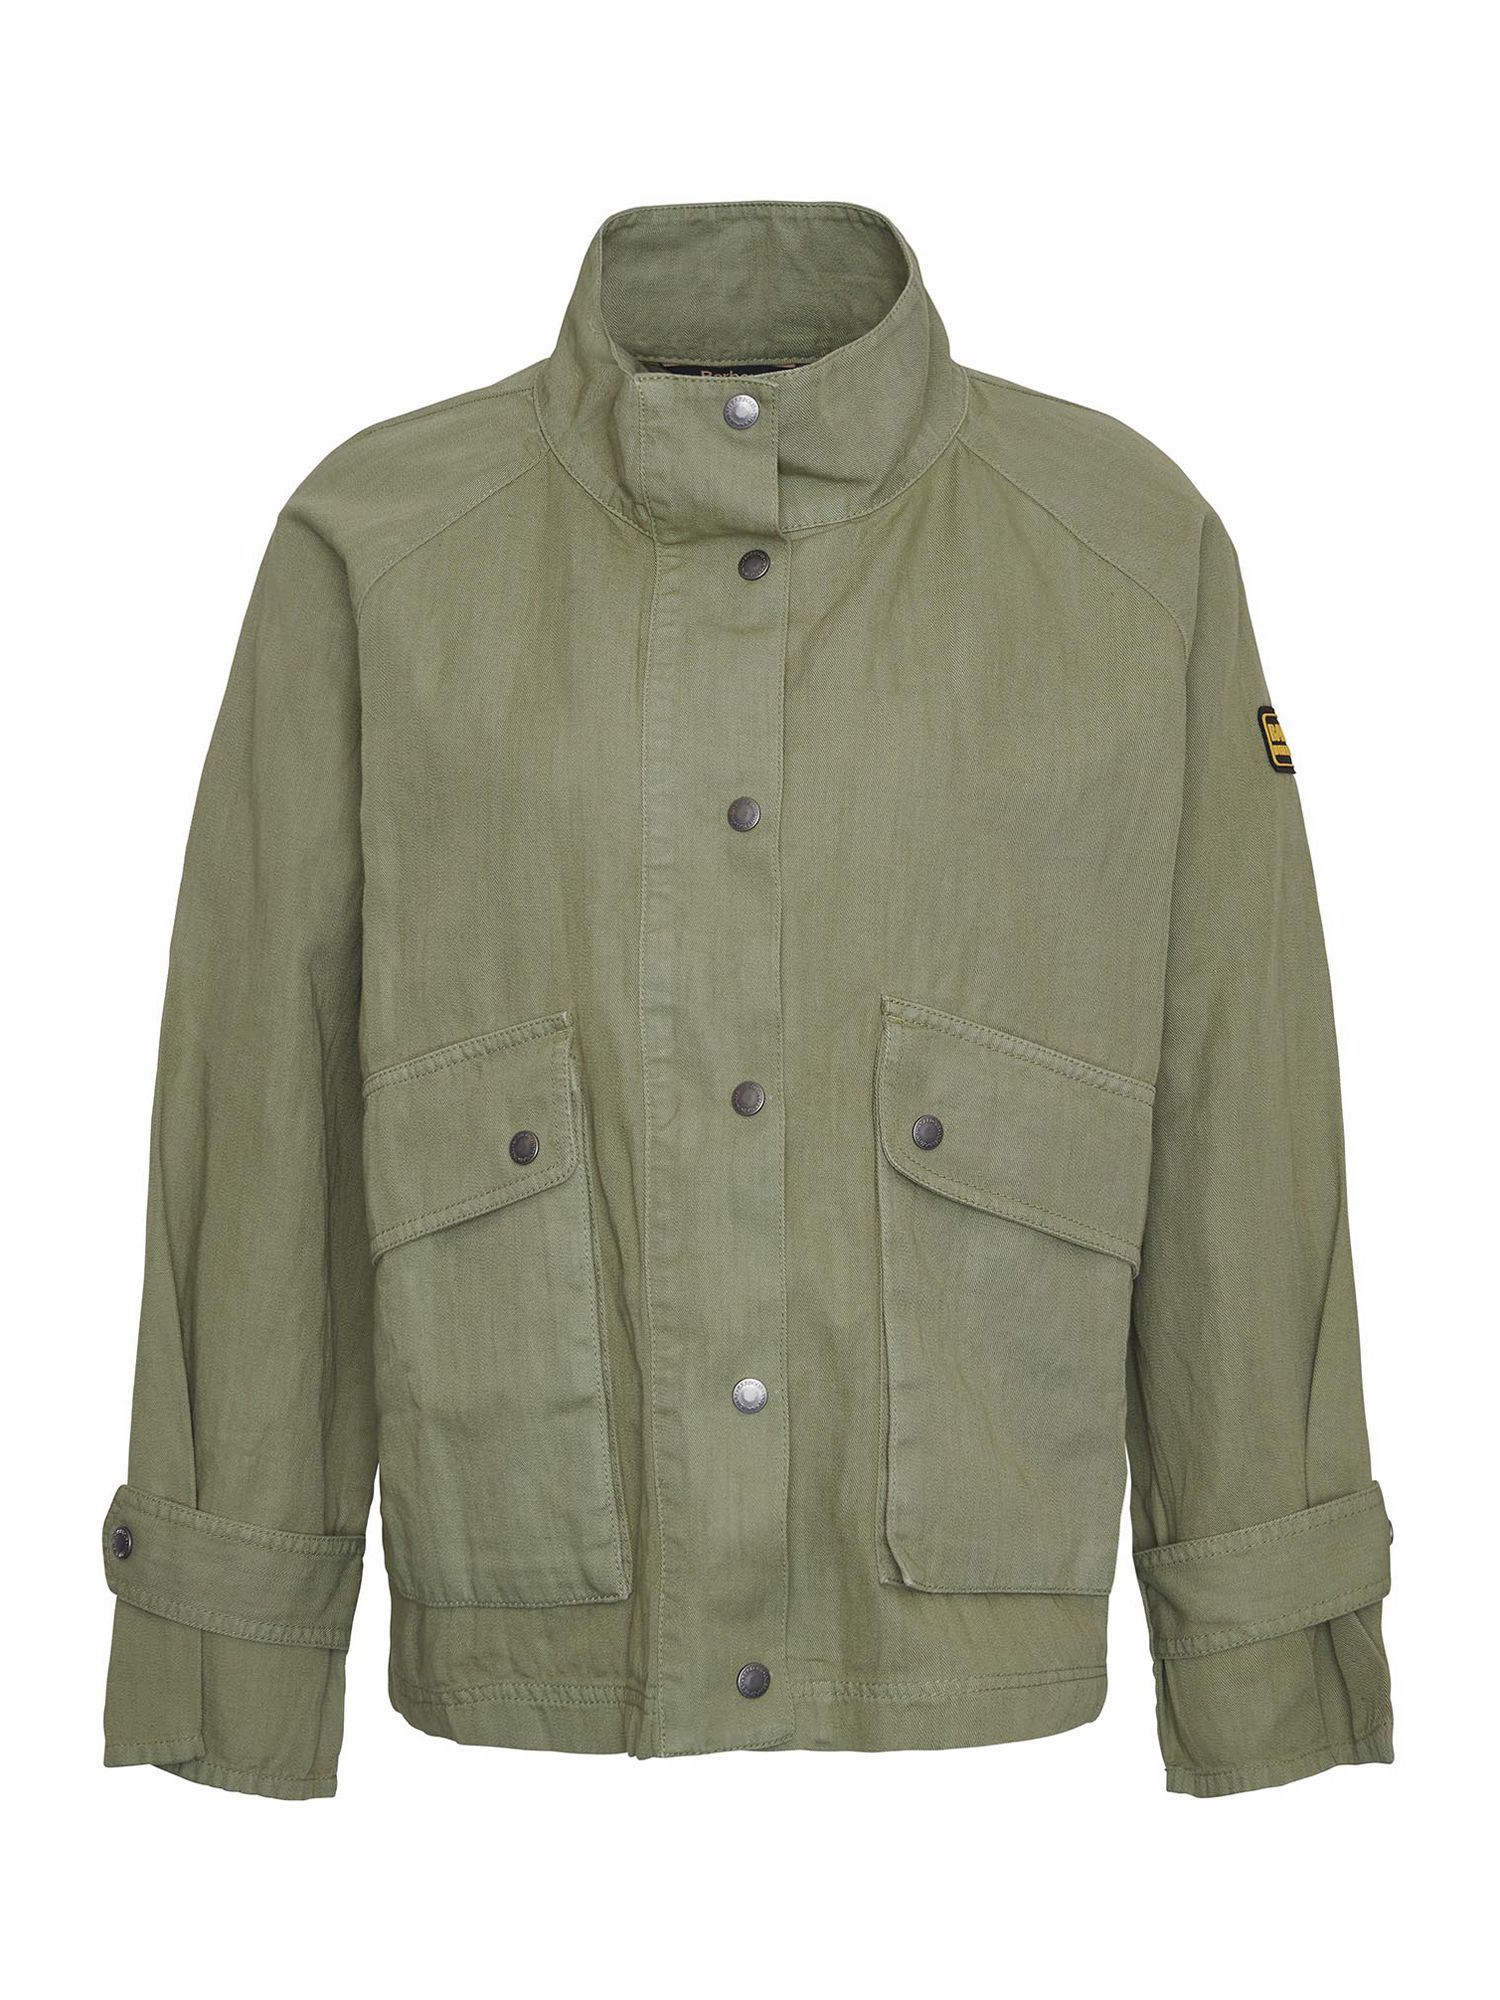 Buy Barbour International Whitson Jacket, Oil Green Online at johnlewis.com